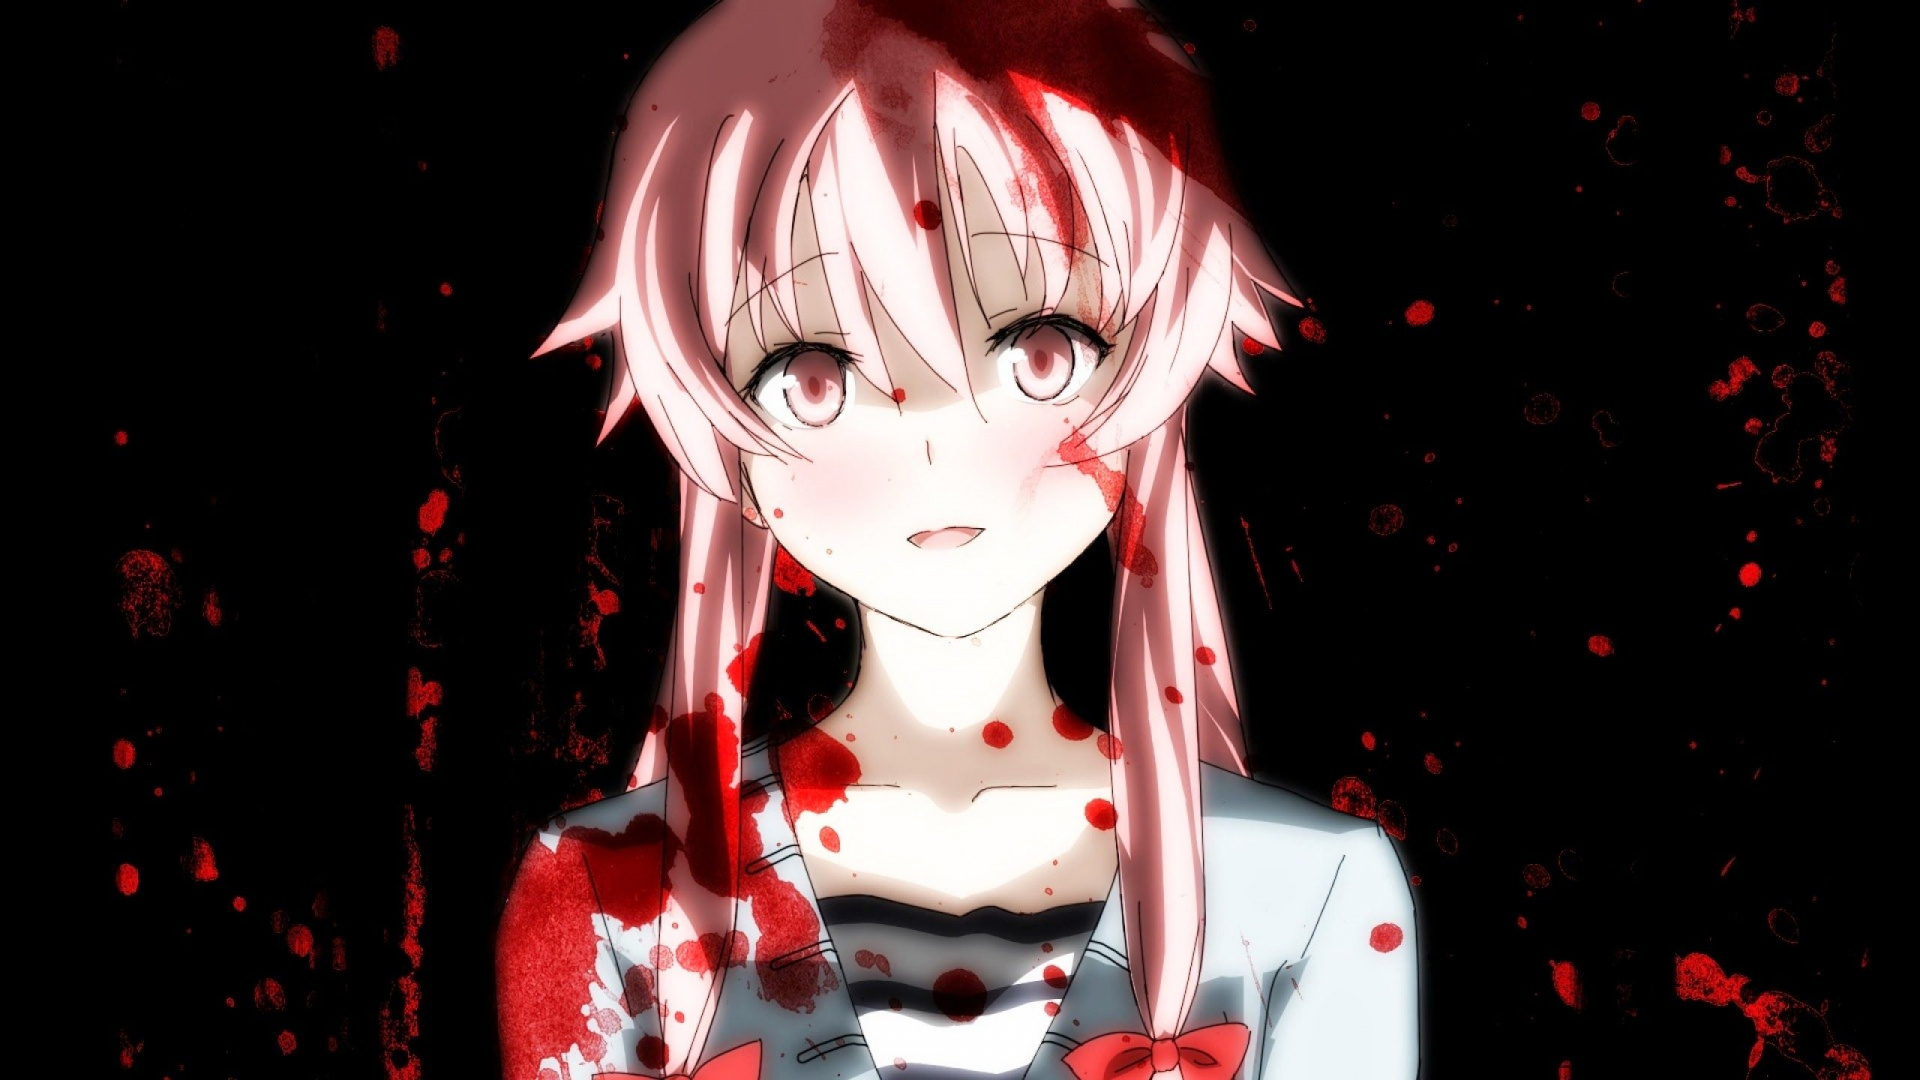 Girl in Red and White Floral Dress Anime Character. Wallpaper in 1920x1080 Resolution